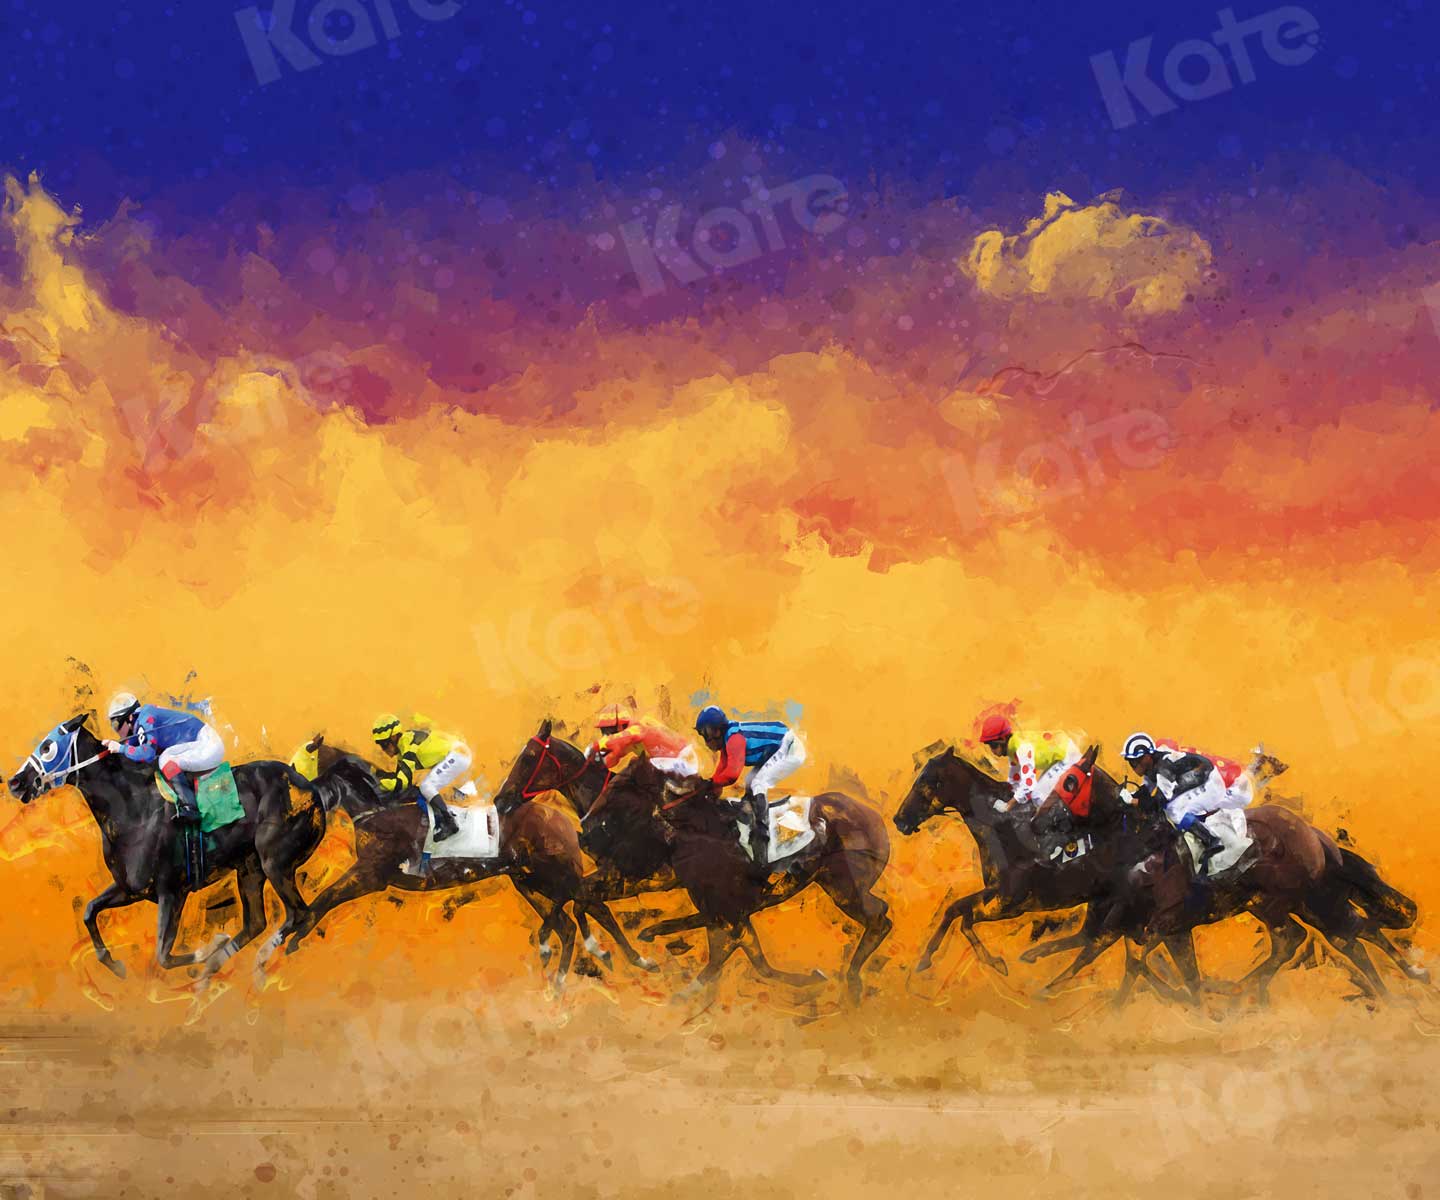 Kate Competition Sport Horserace Abstract Backdrop for Photography